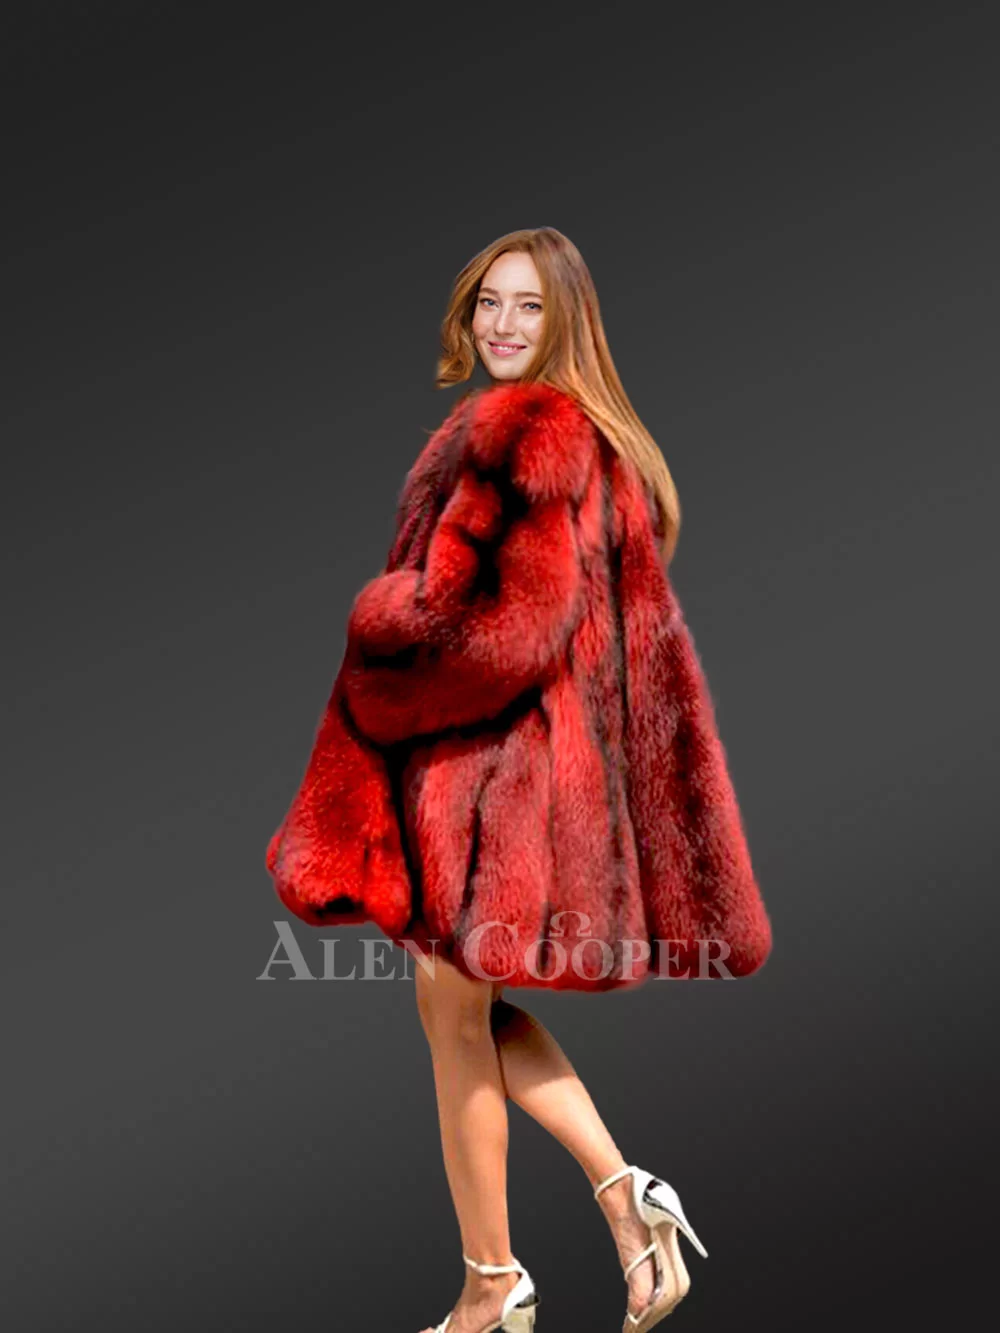 Women's Red Coats, Explore our New Arrivals